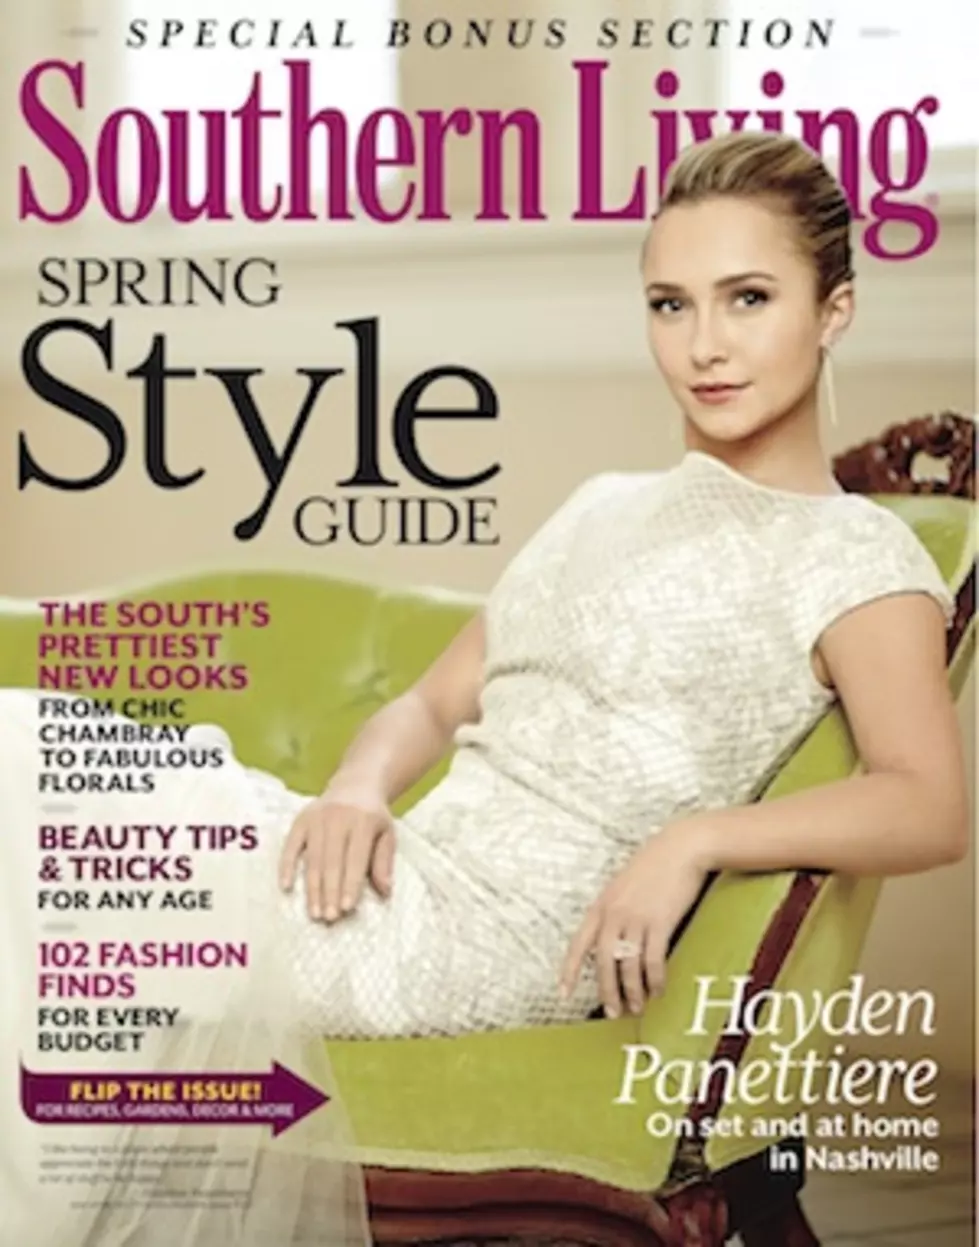 Hayden Panettiere on Nashville Home: &#8216;I Can Live a Normal Life Here&#8217;